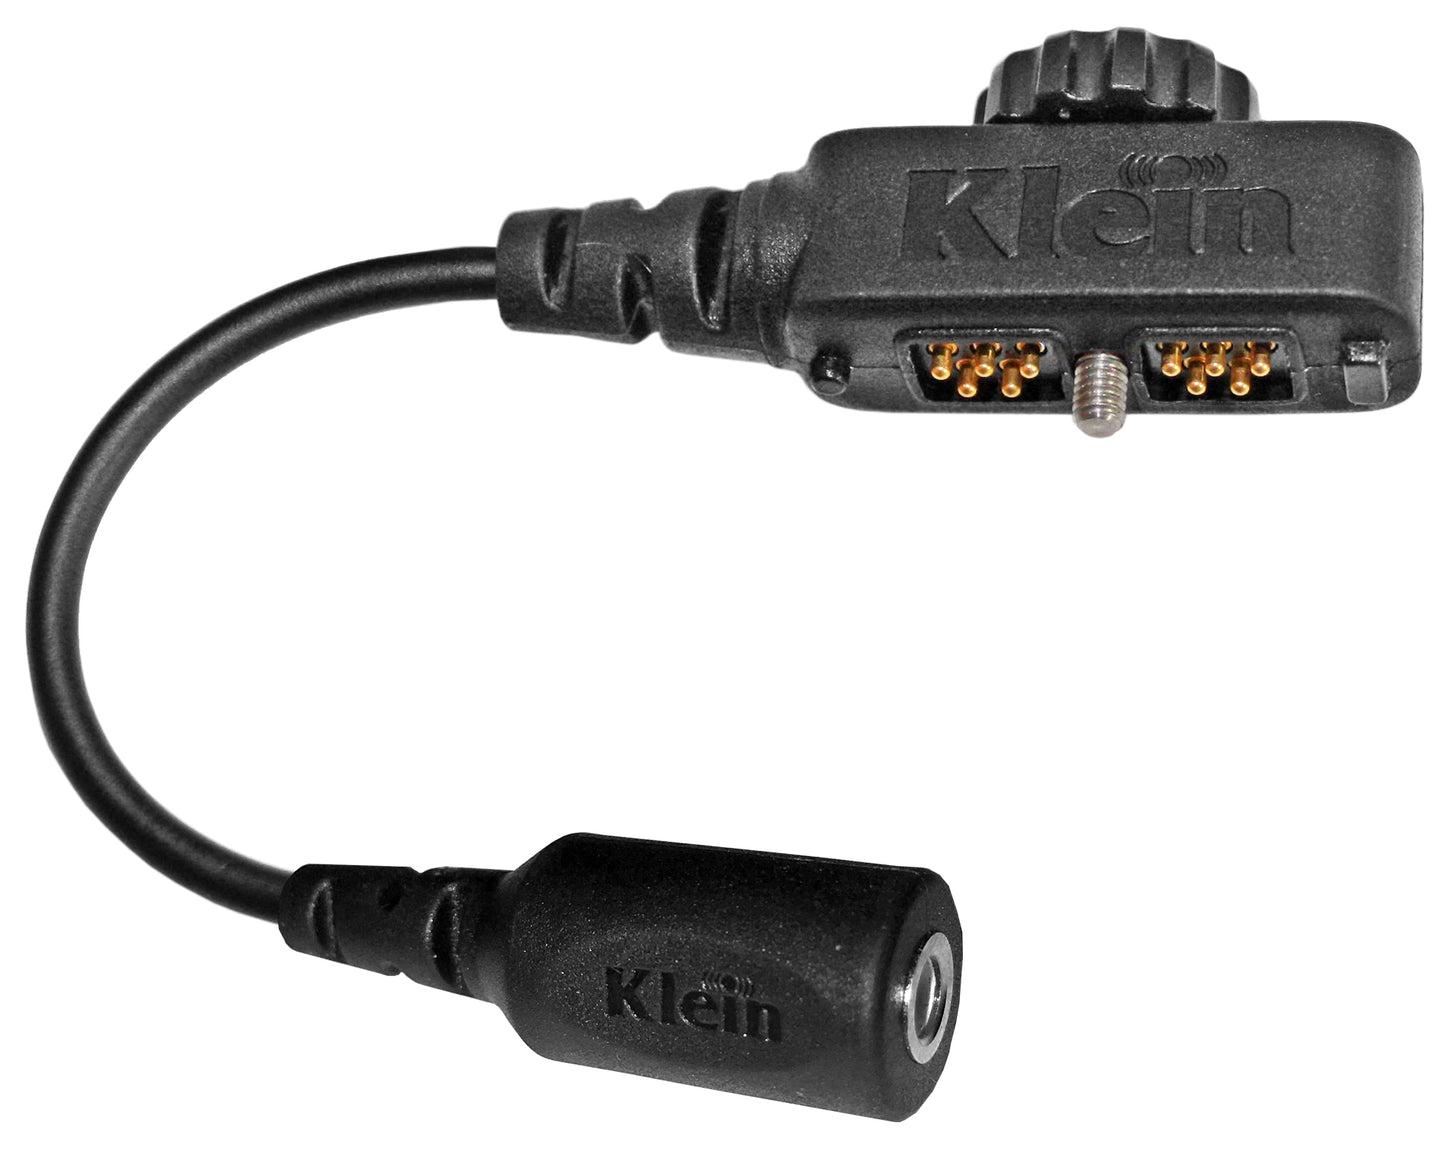 Klein 3.5mm adapter for Sonim XP5s and XP8